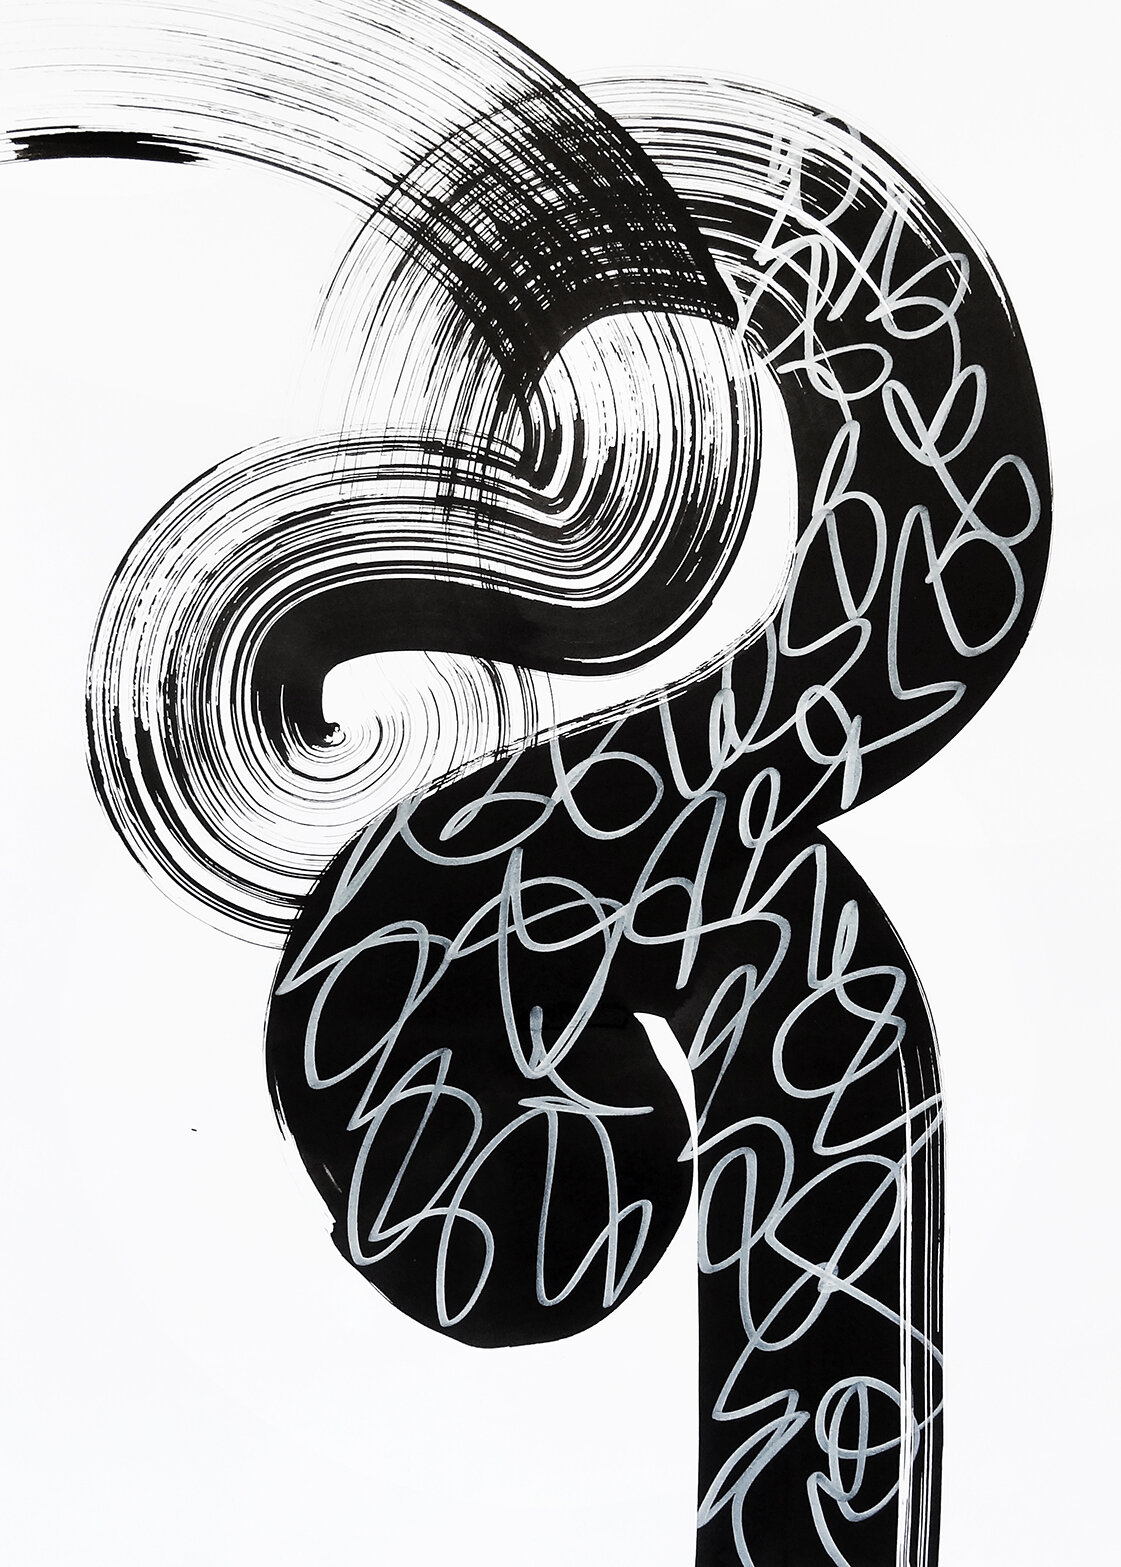  Untitled, 2020 strokes series calligraphy ink on paper 42,0 x 29,7 cm (12-20) 